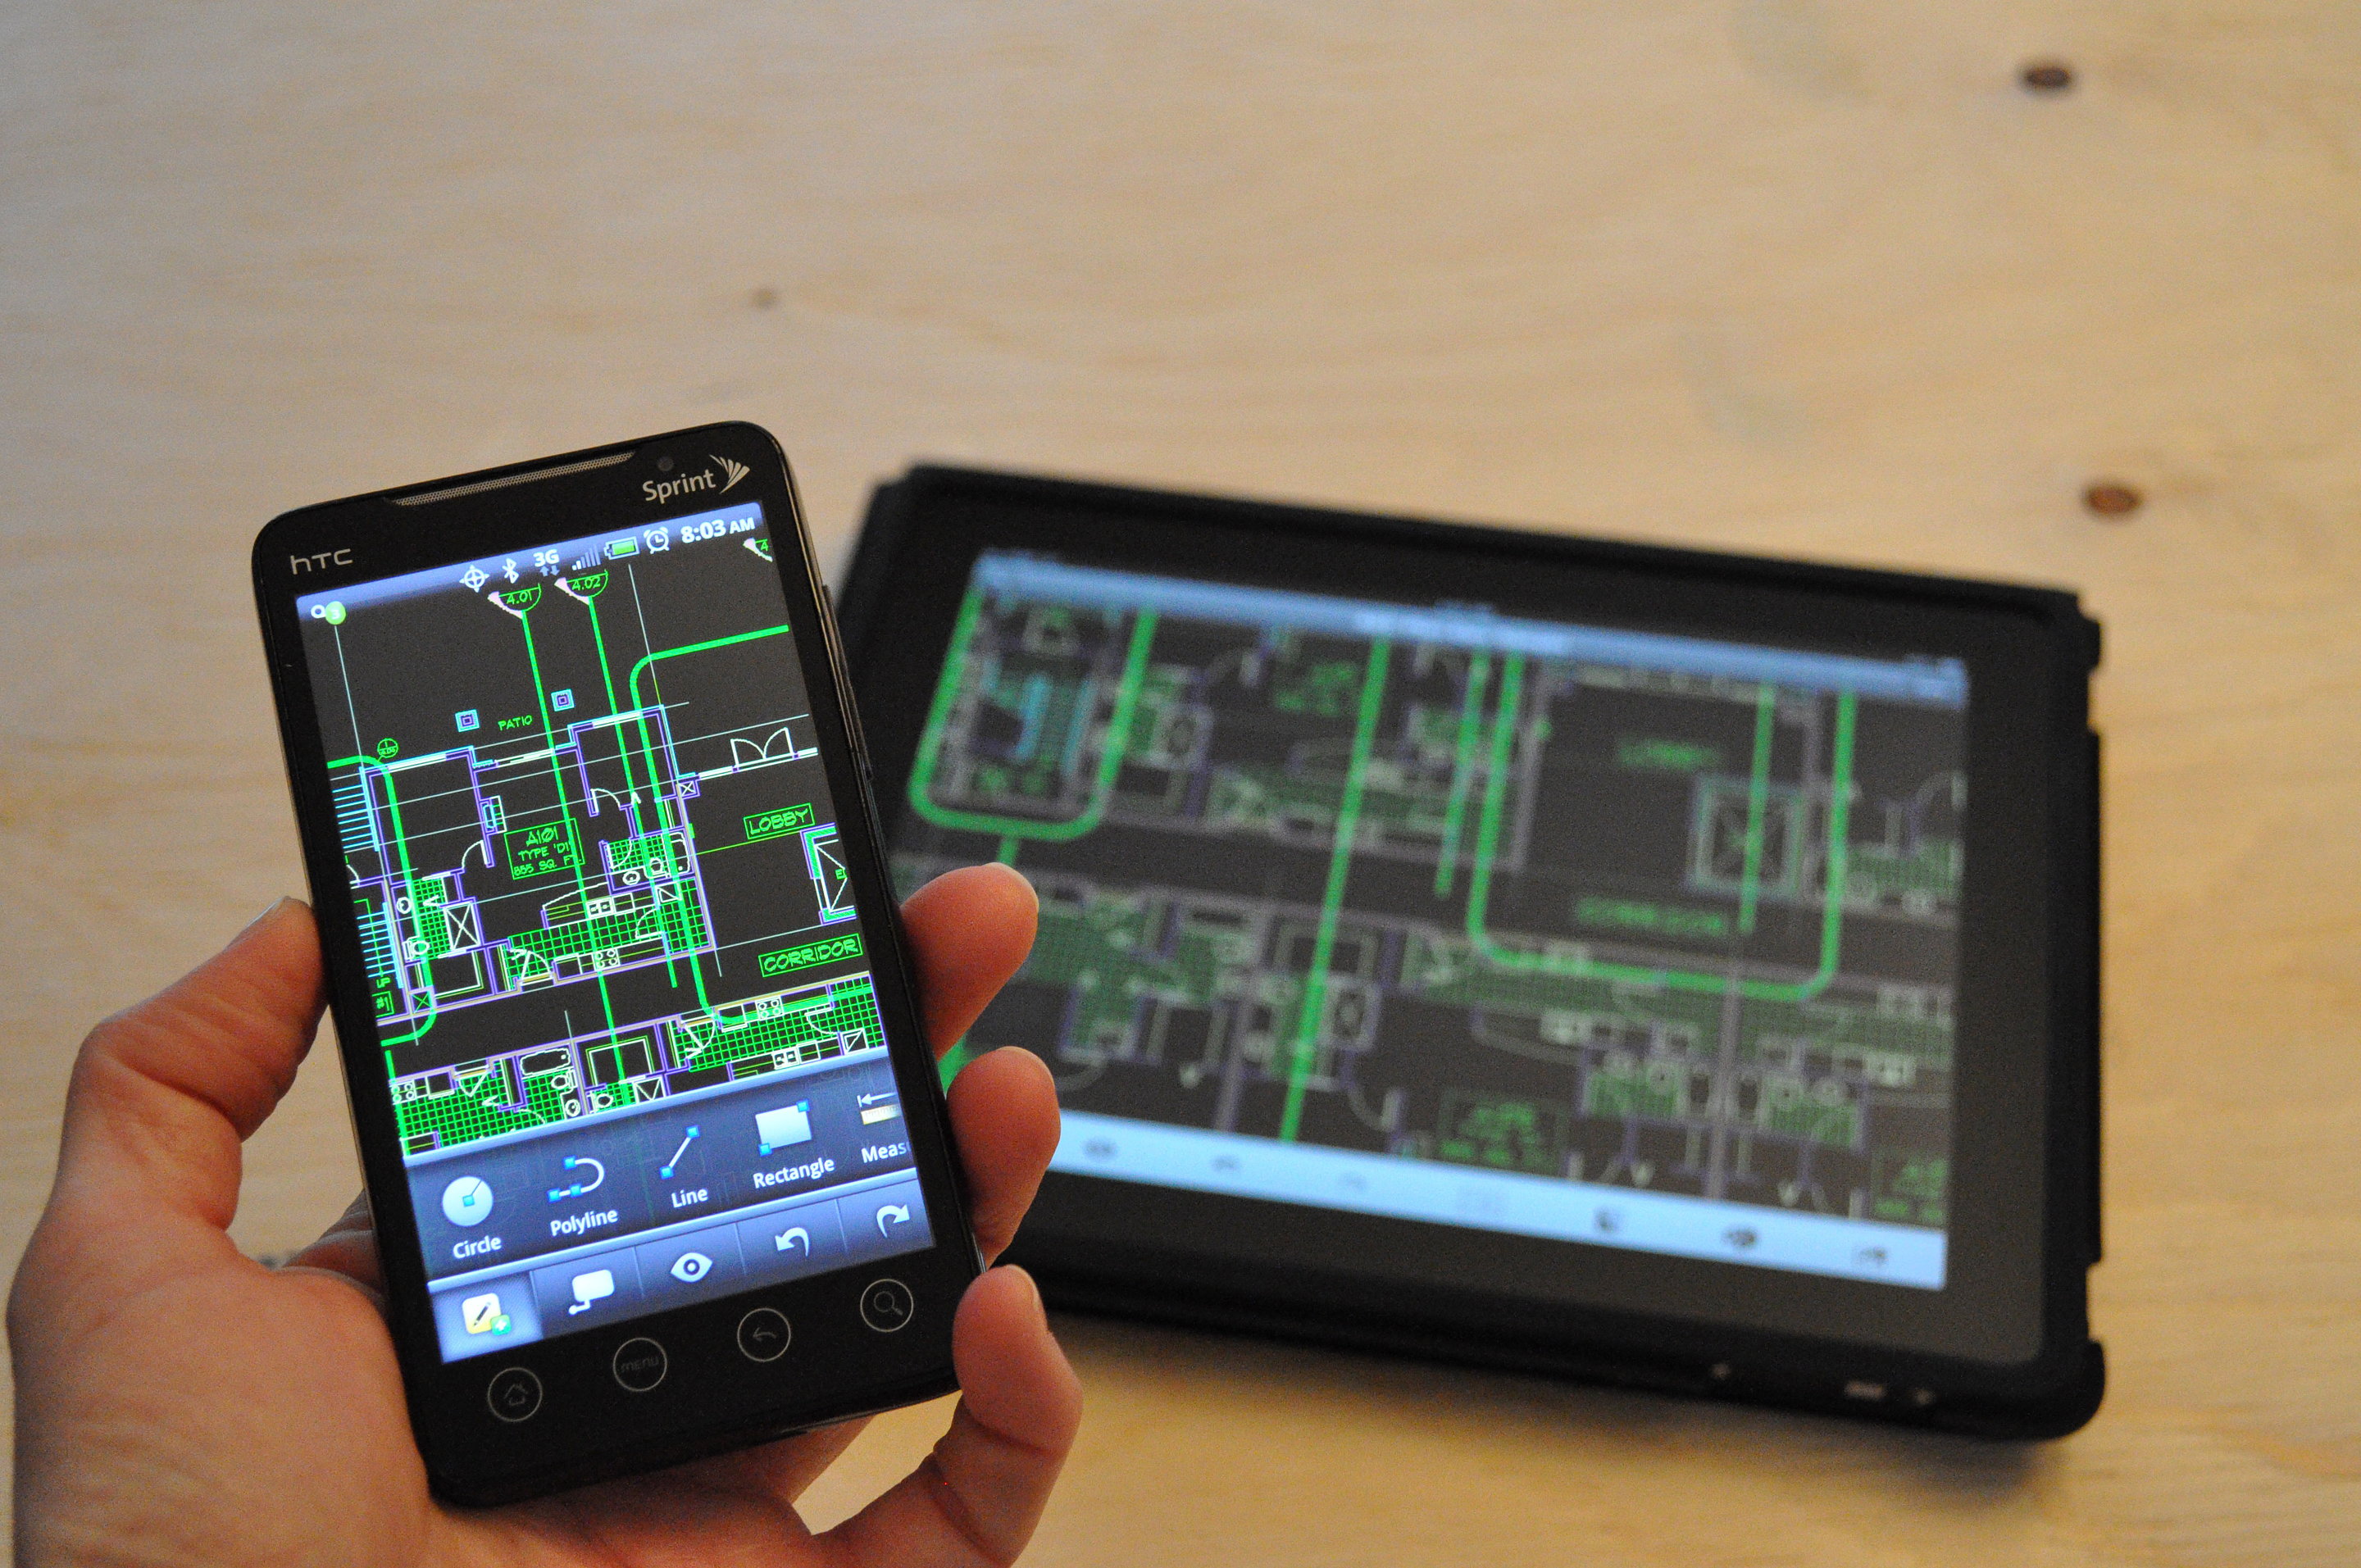 Download autocad app for android